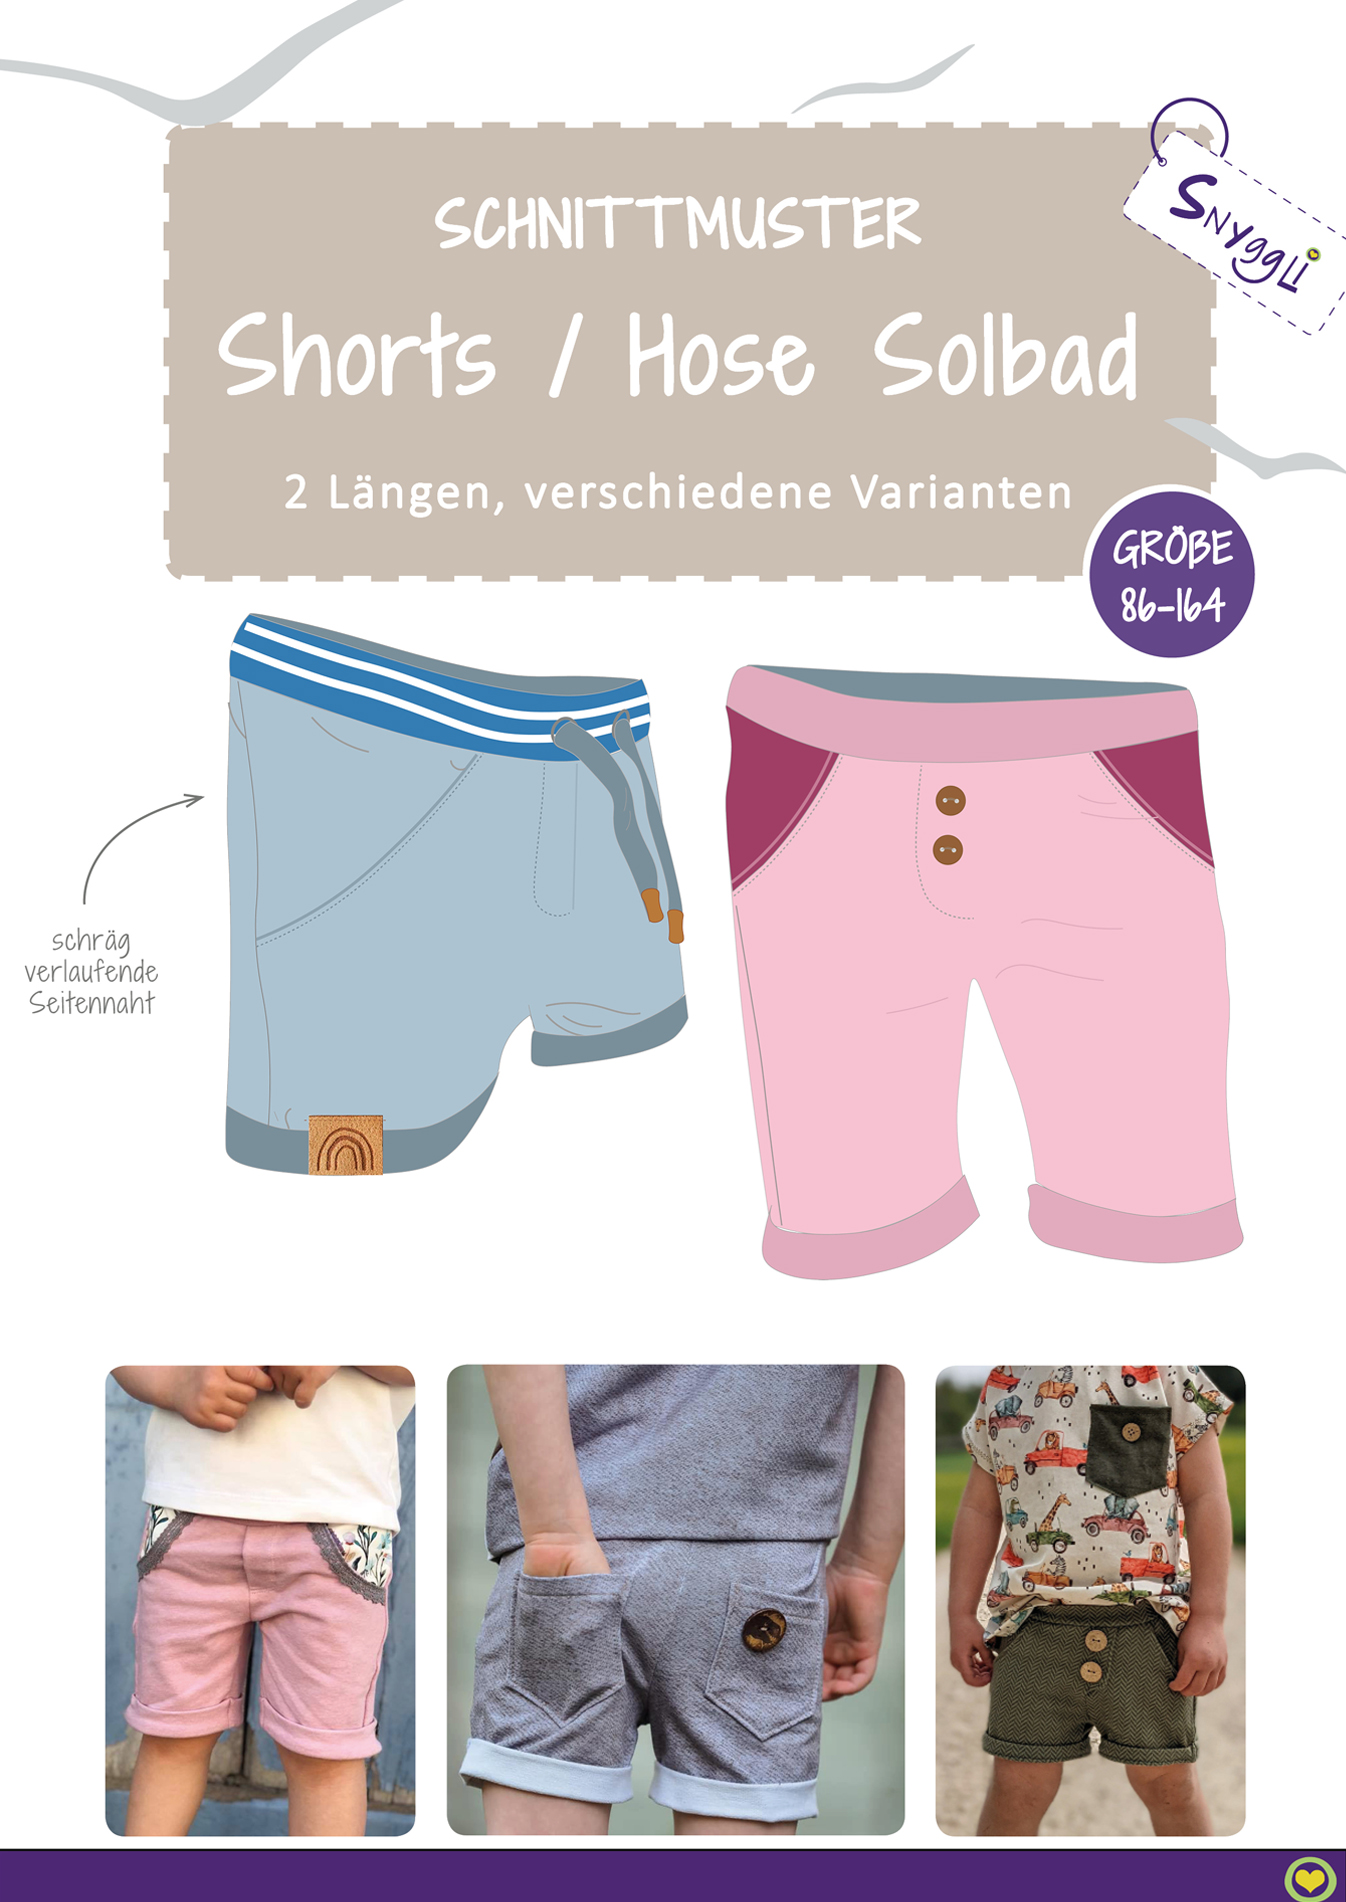 Snyggli Schnittmuster kurze Hose Shorts Solbad Cover